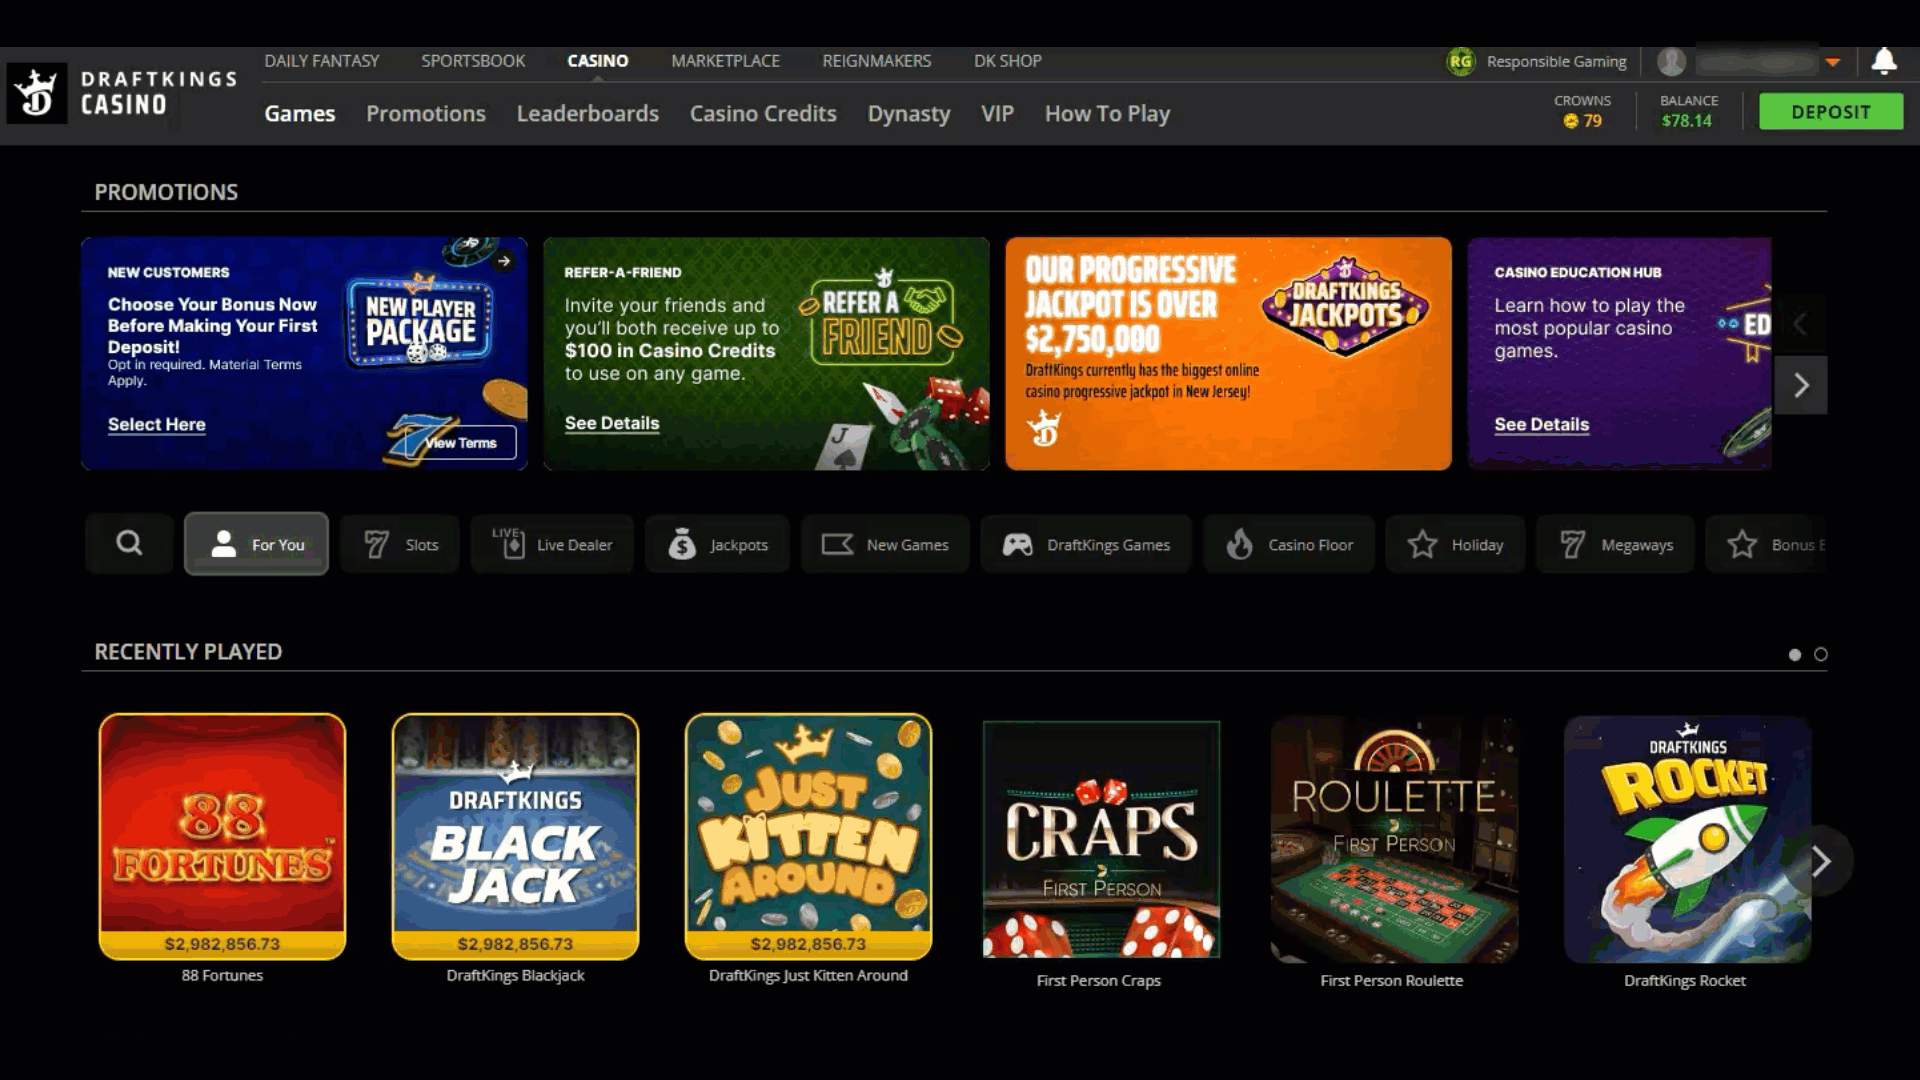 How to use Casino Credits via the DraftKings website